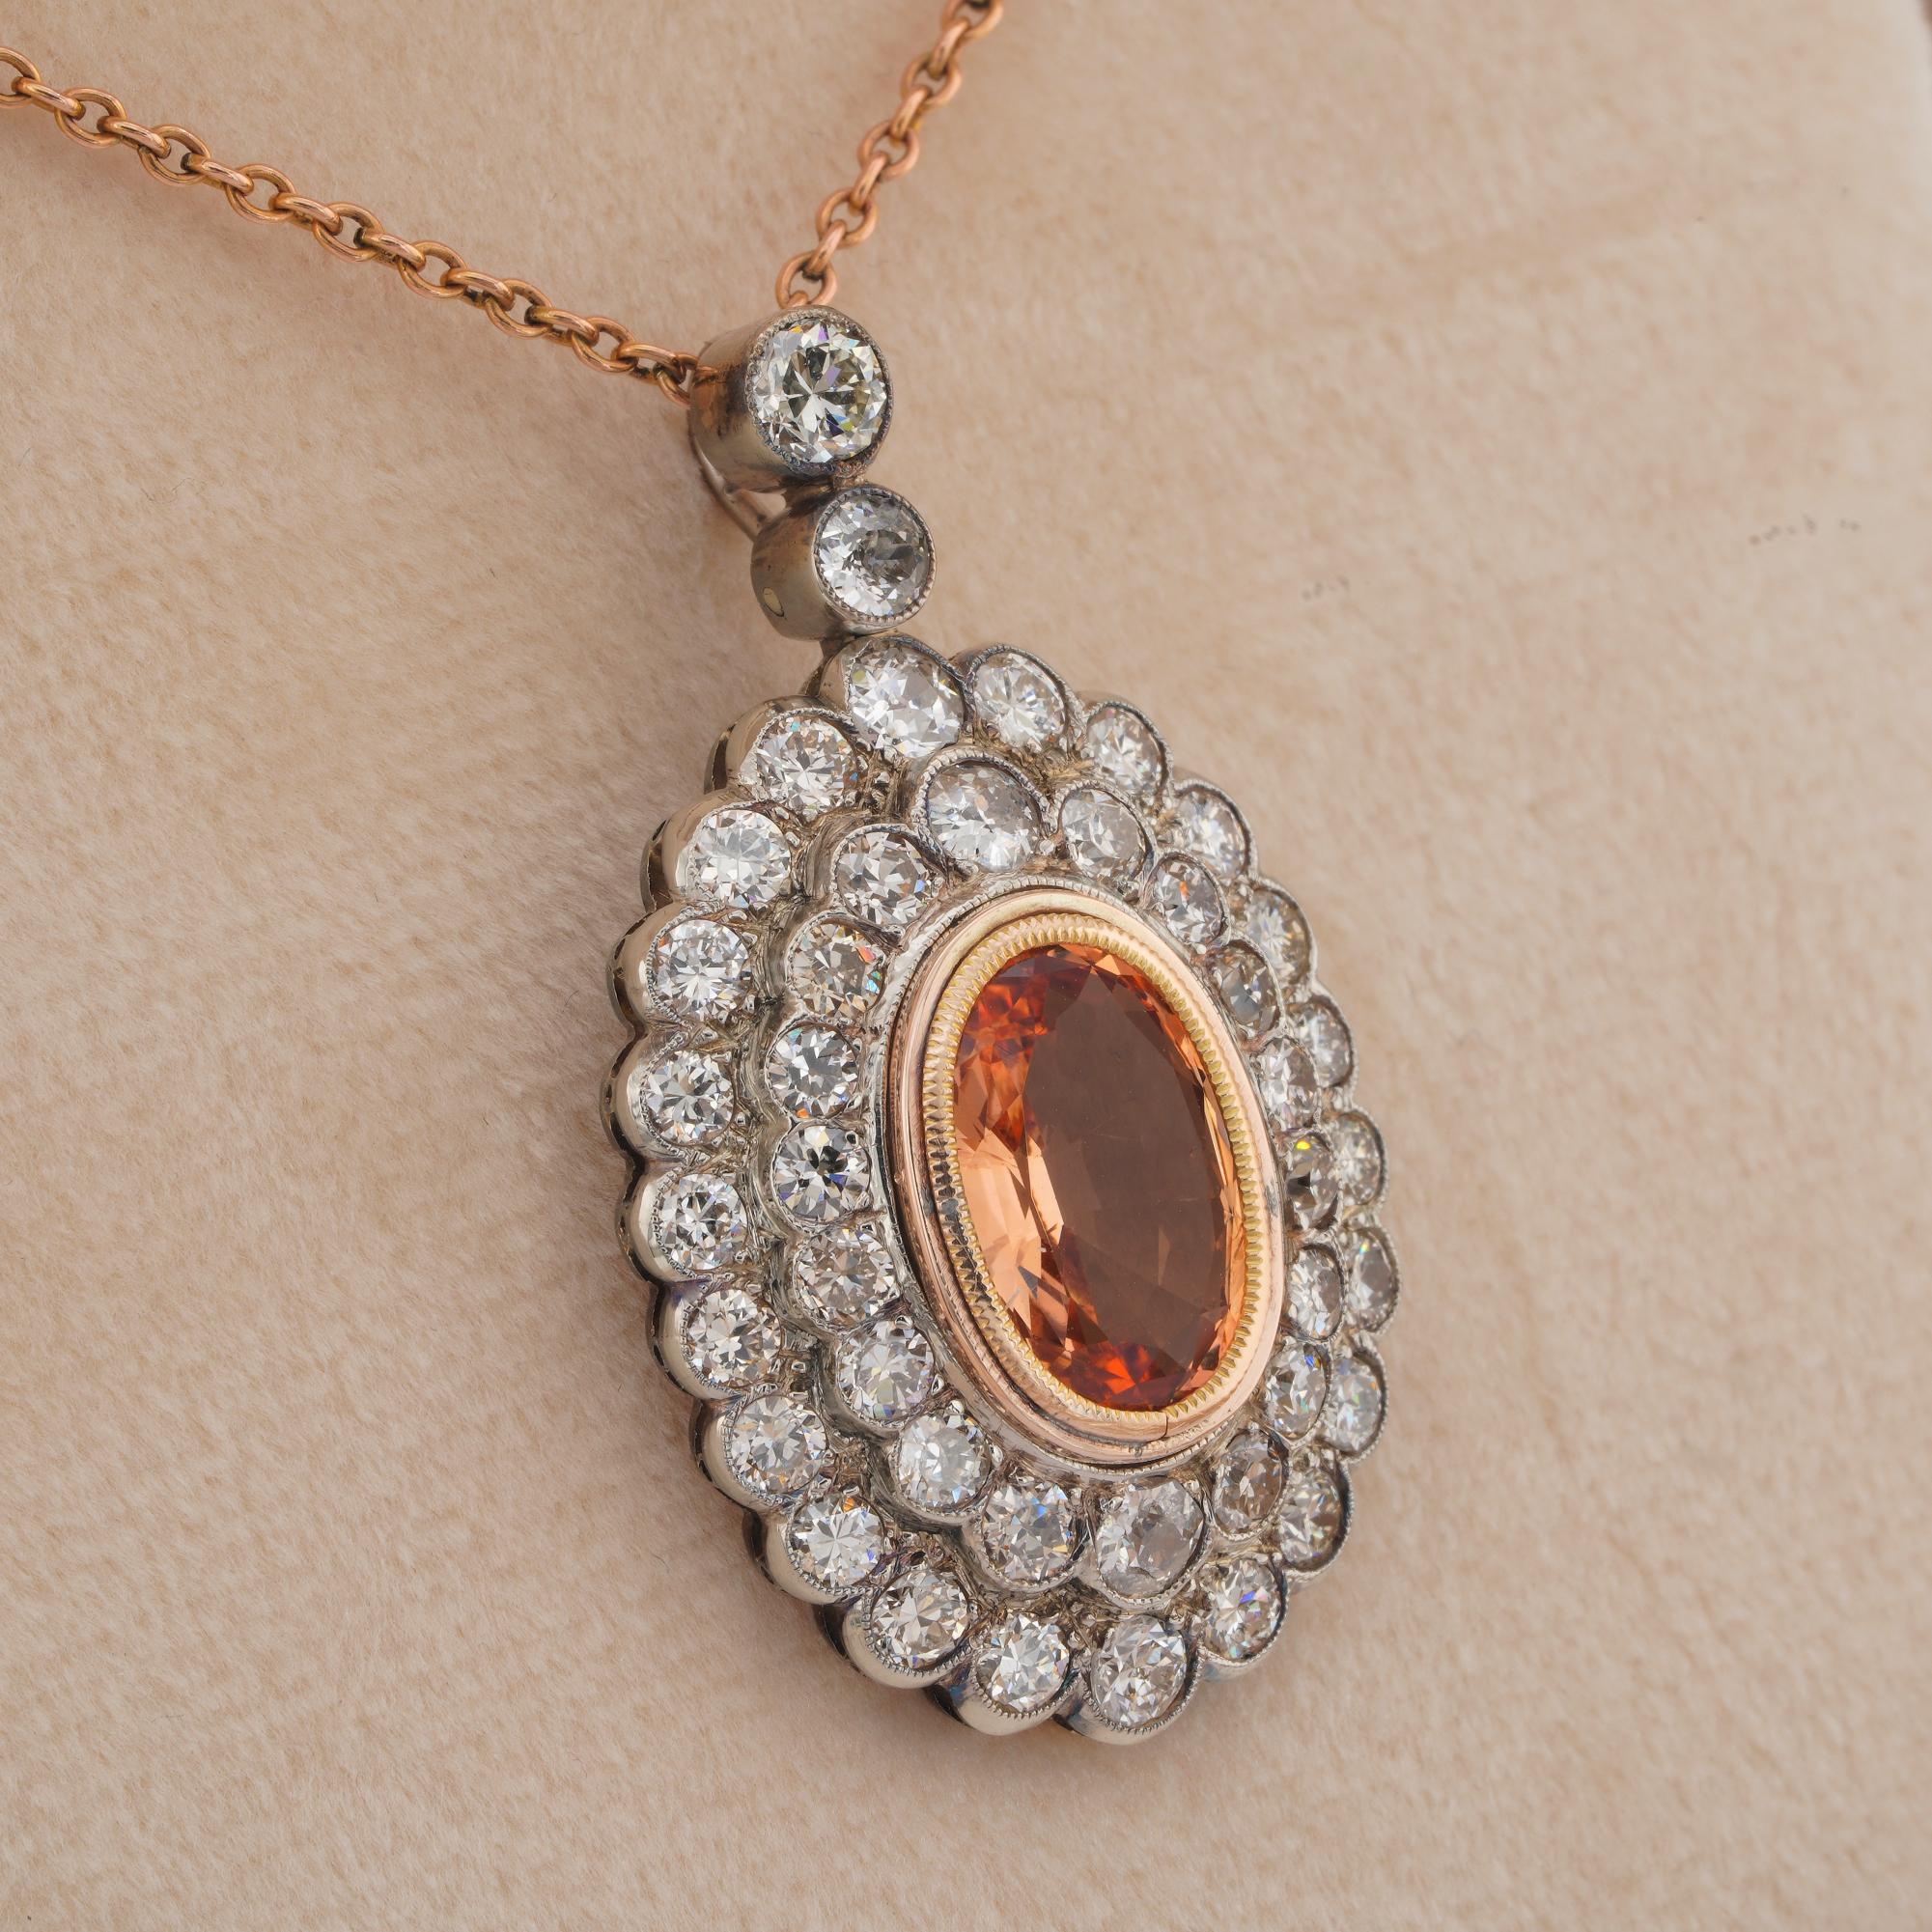 Past Treasures
This outstanding and quite unique antique pendant is Victorian in transition to the Edwardian period 1900 ca.
Boasting fine workmanship of the a glorious bygone past rendered in gold and silver
Preciousness and eternal elegance is